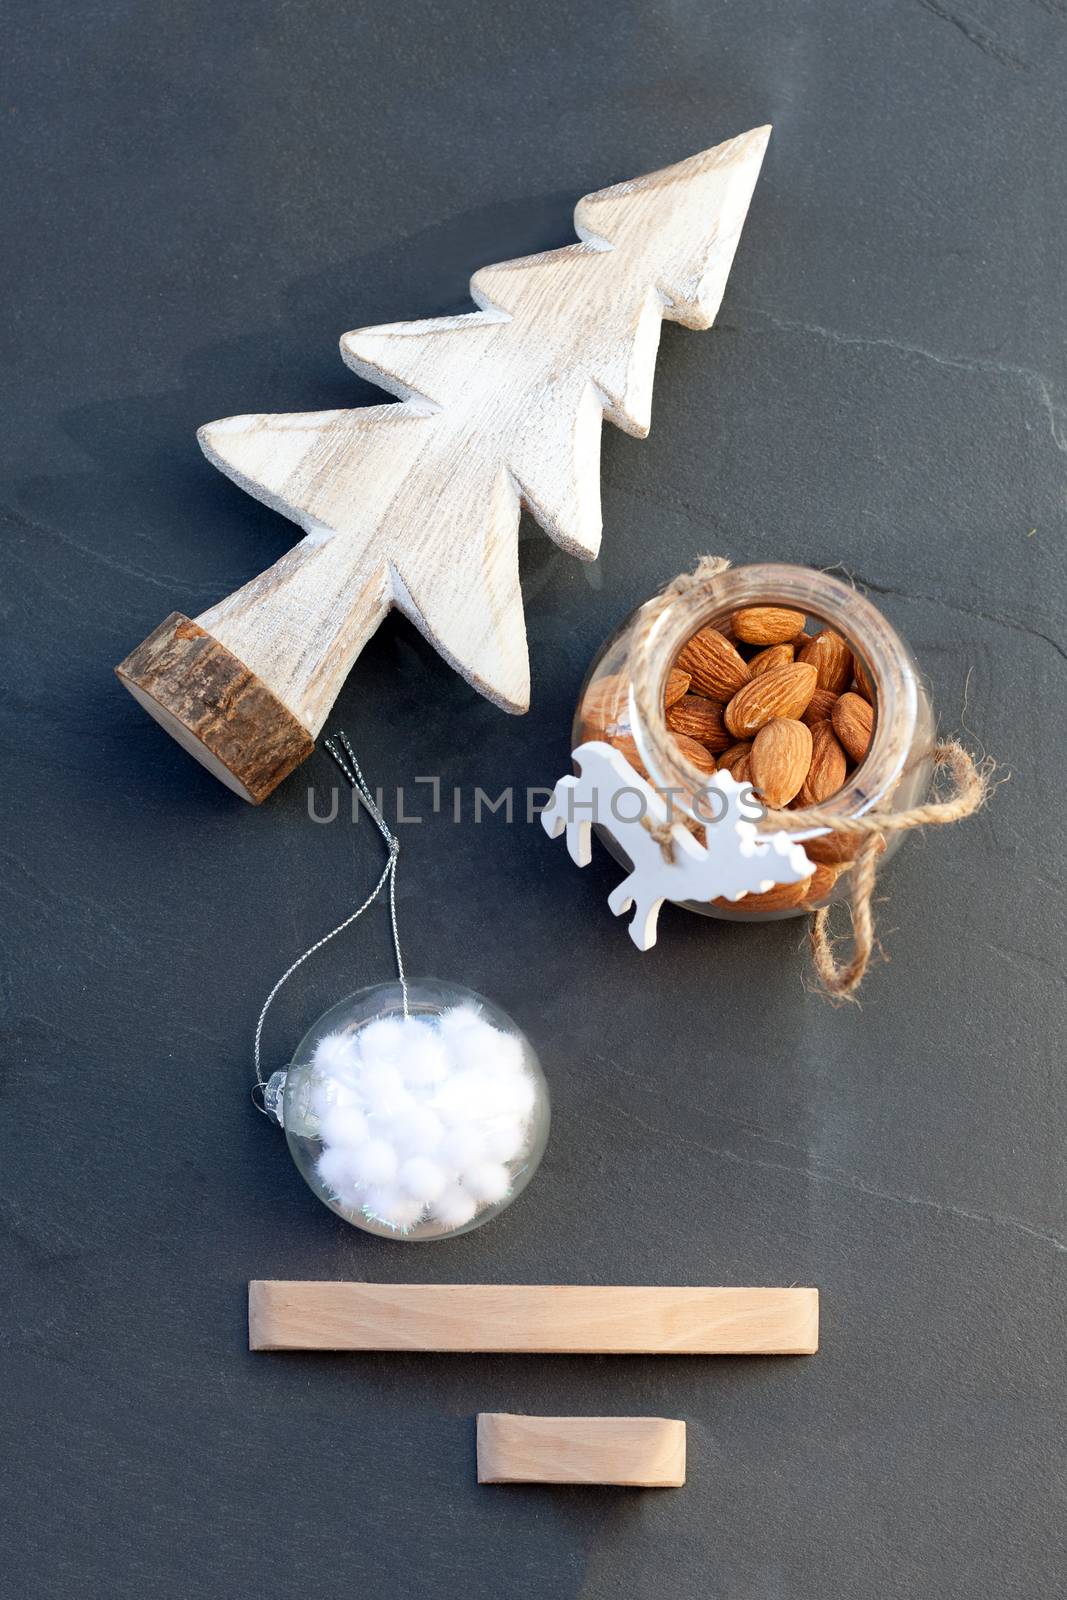 Christmas symbols including Christmas tree, almonds and toy